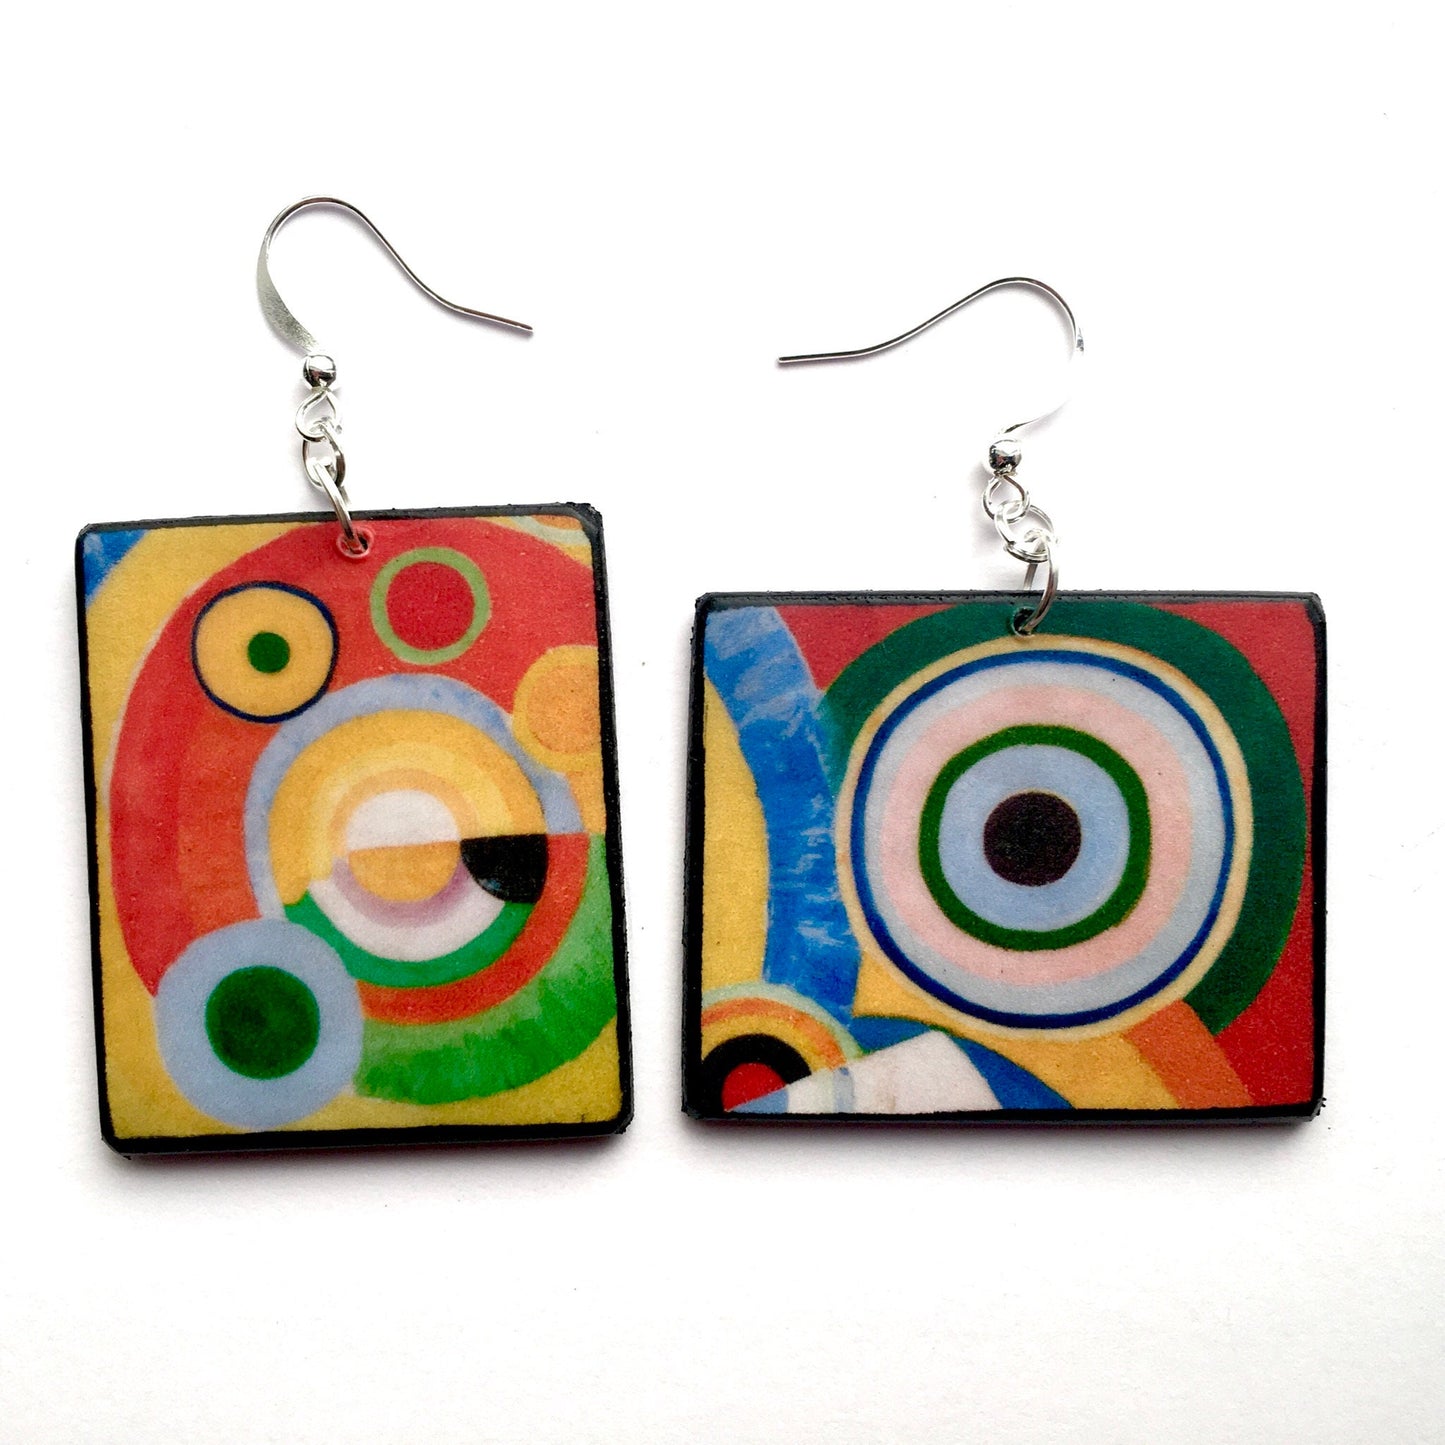 Asymmetrical, geometric, colourful art earrings inspired by Robert Delaunay famous painting "Rythme, Joie de vivre". Sustainable wood and plated silver hooks. Dimensions: cm 4 x 3.5 x 3mm approx. 